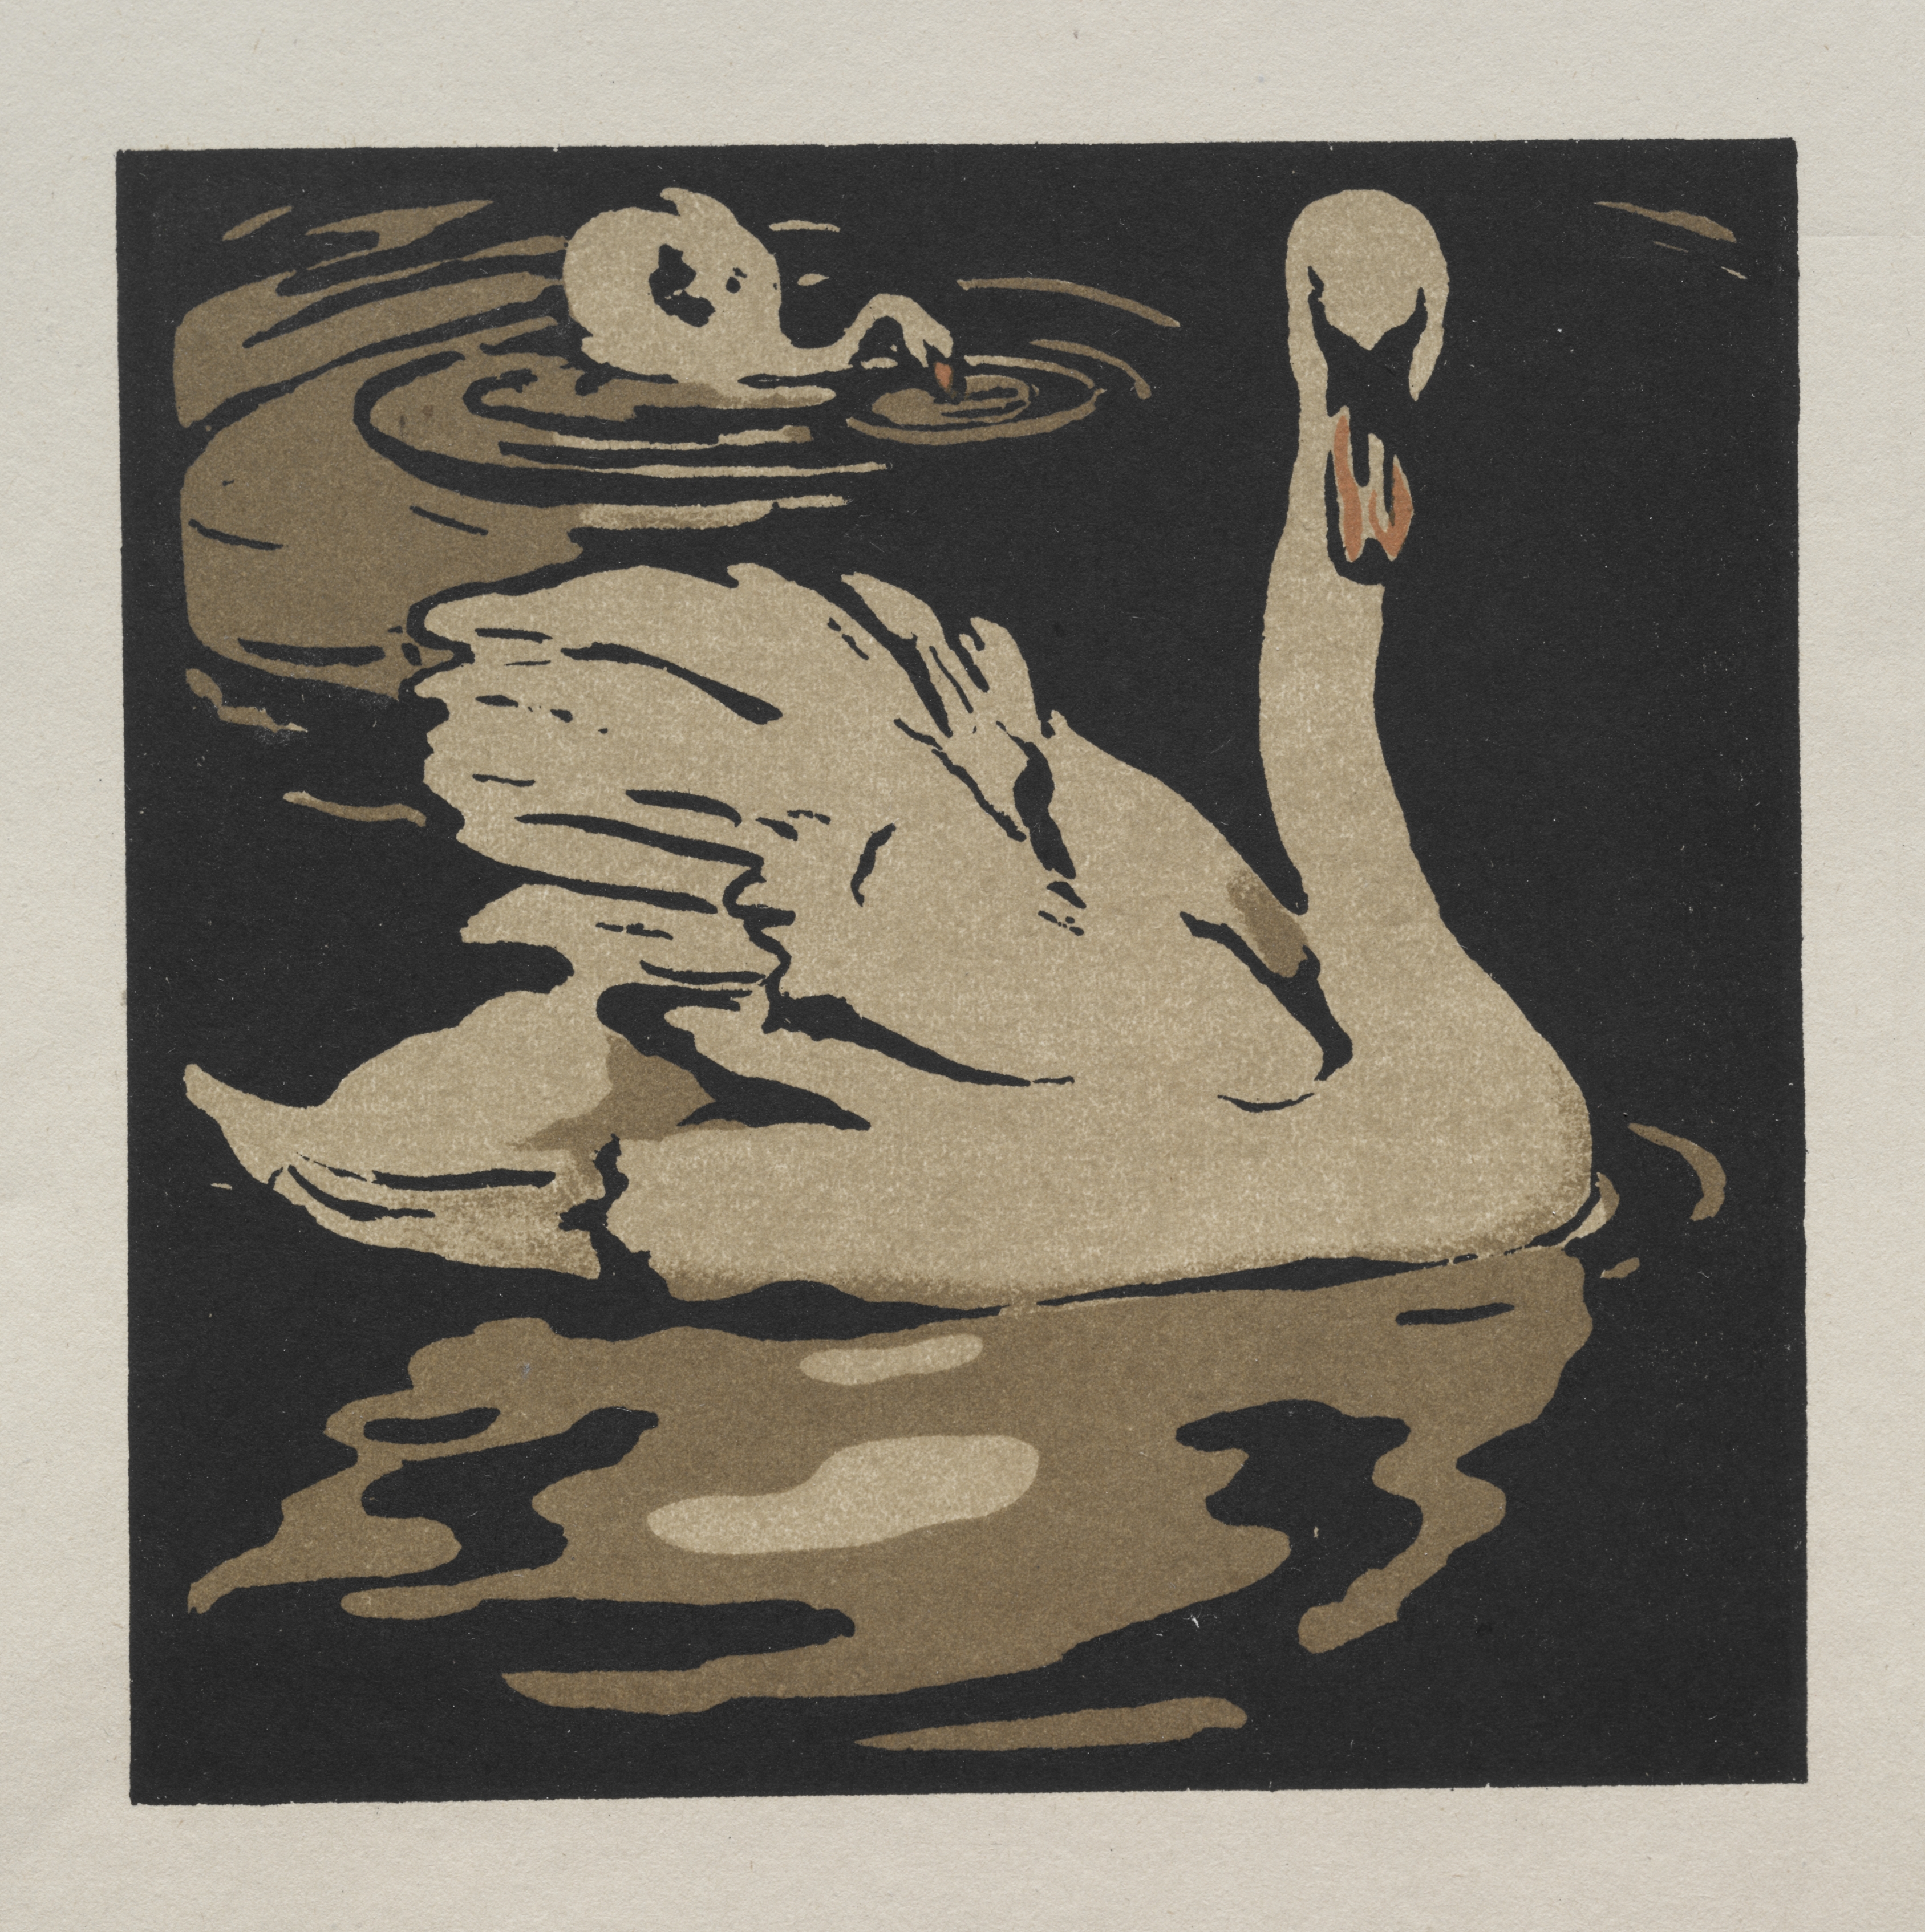 The Square Book of Animals: The Beautiful Swan